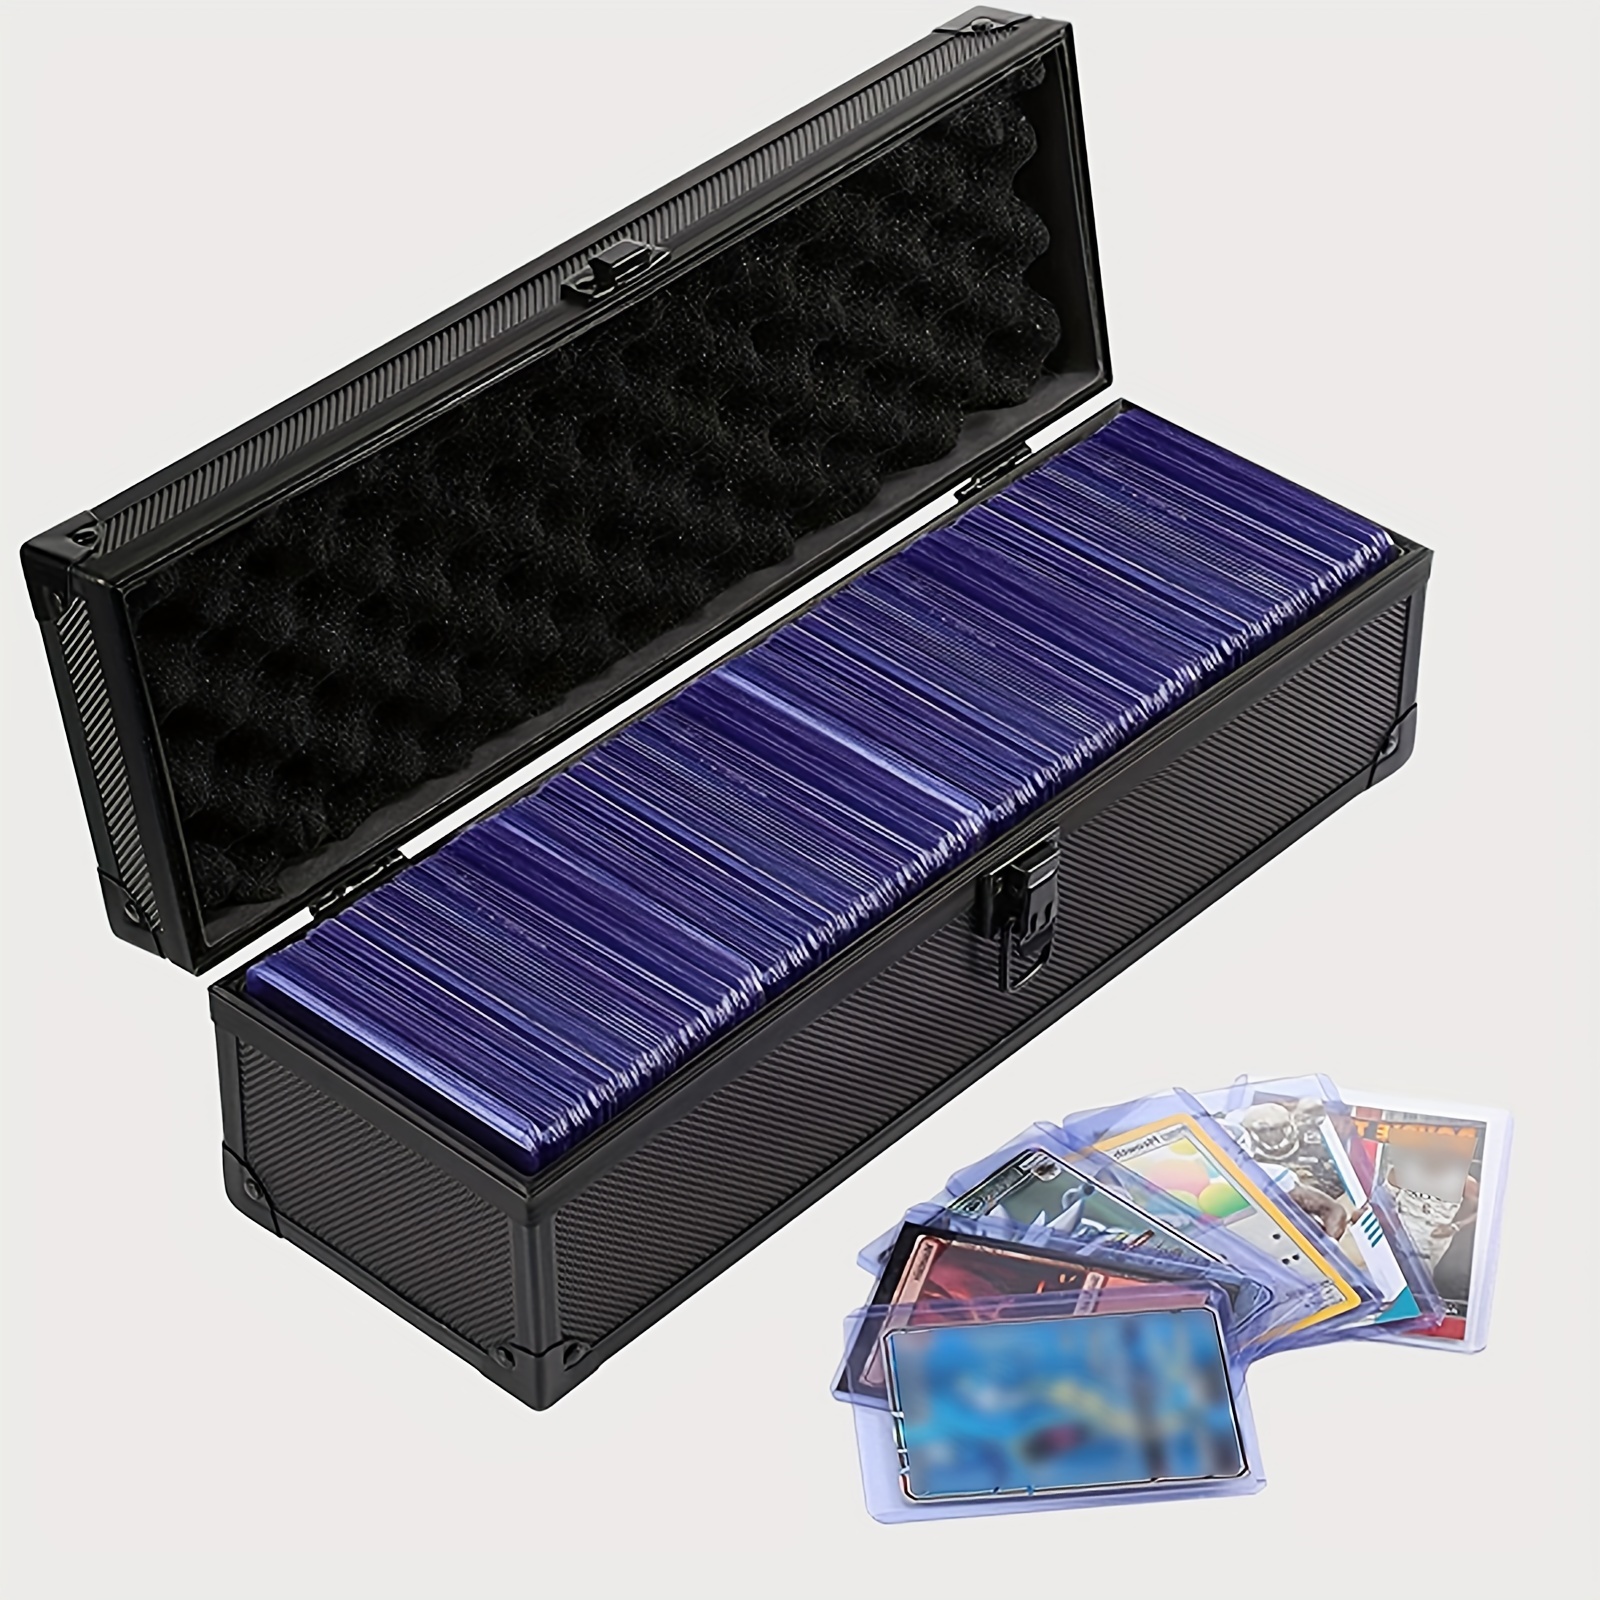 

Cards Holder Hard Case For Trading Cards & Sports Baseball Basketball Cards, Cards Storage Box For Tcg Ptcg